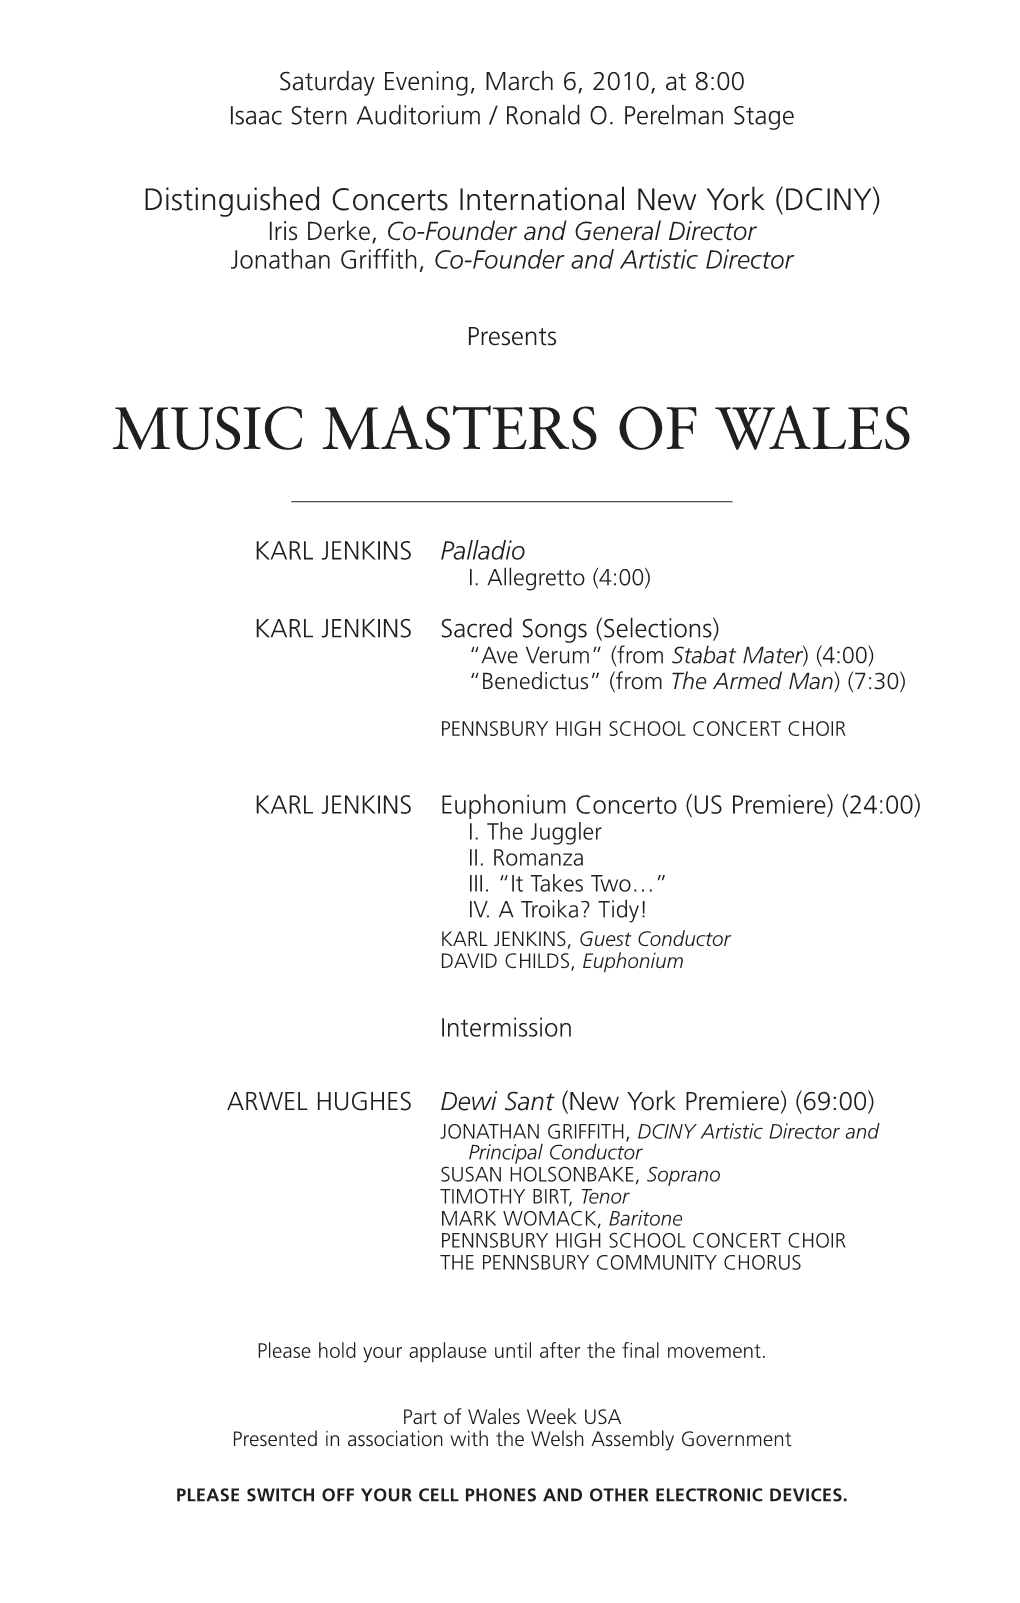 Music Masters of Wales